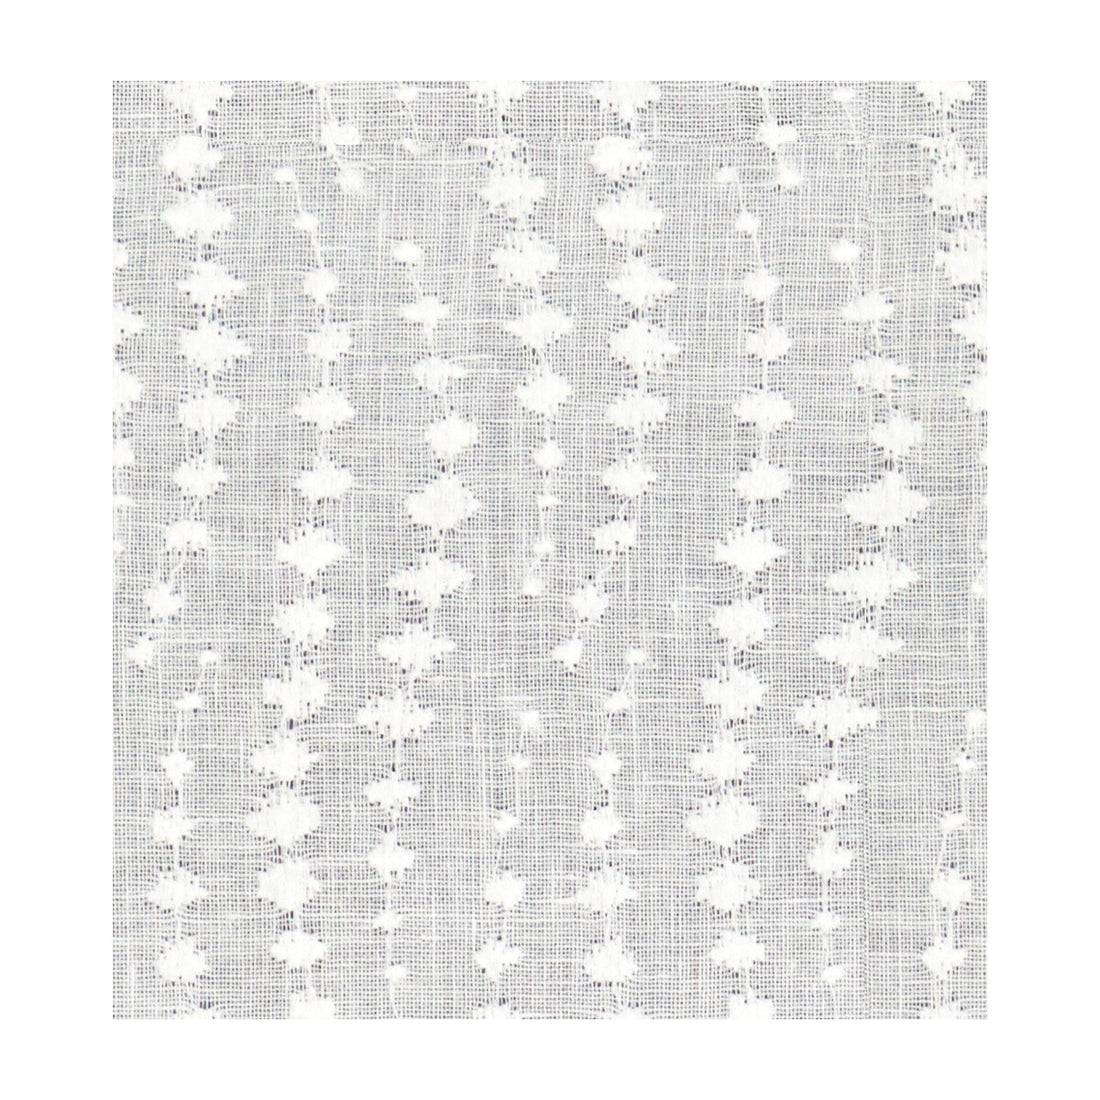 Dropsheer fabric in cream color - pattern 4223.101.0 - by Kravet Basics in the Sarah Richardson Harmony collection